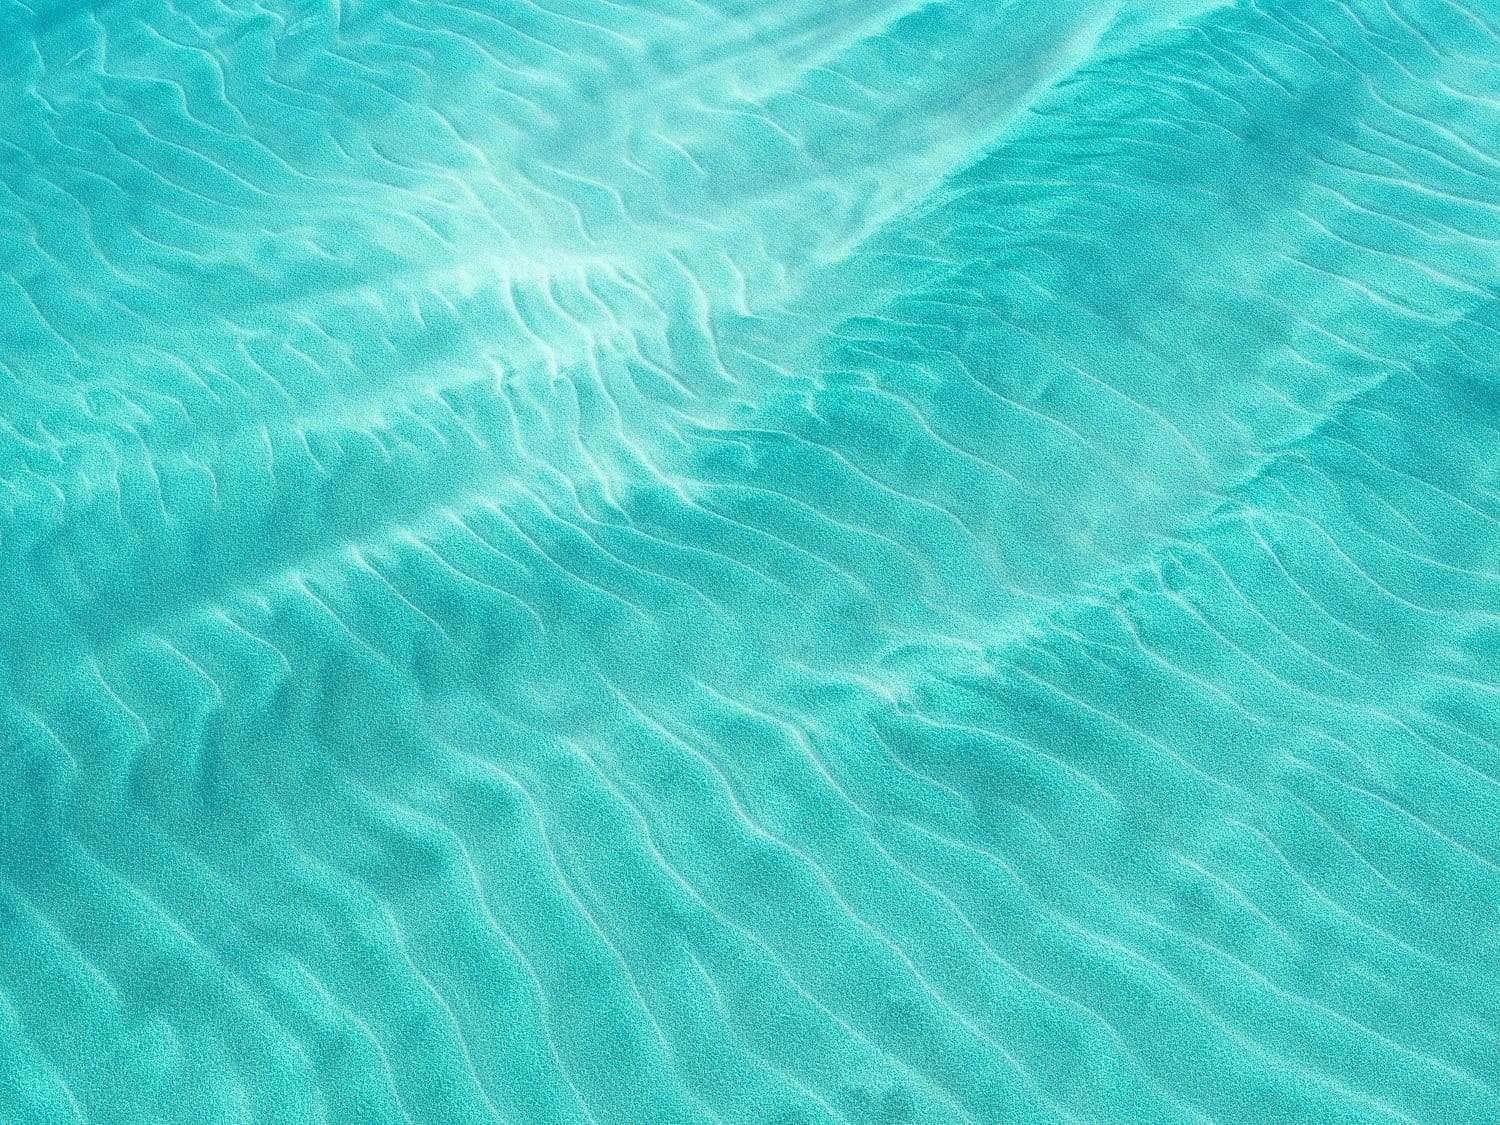 Aerial view of a wavy ice-blue ocean, Inviting